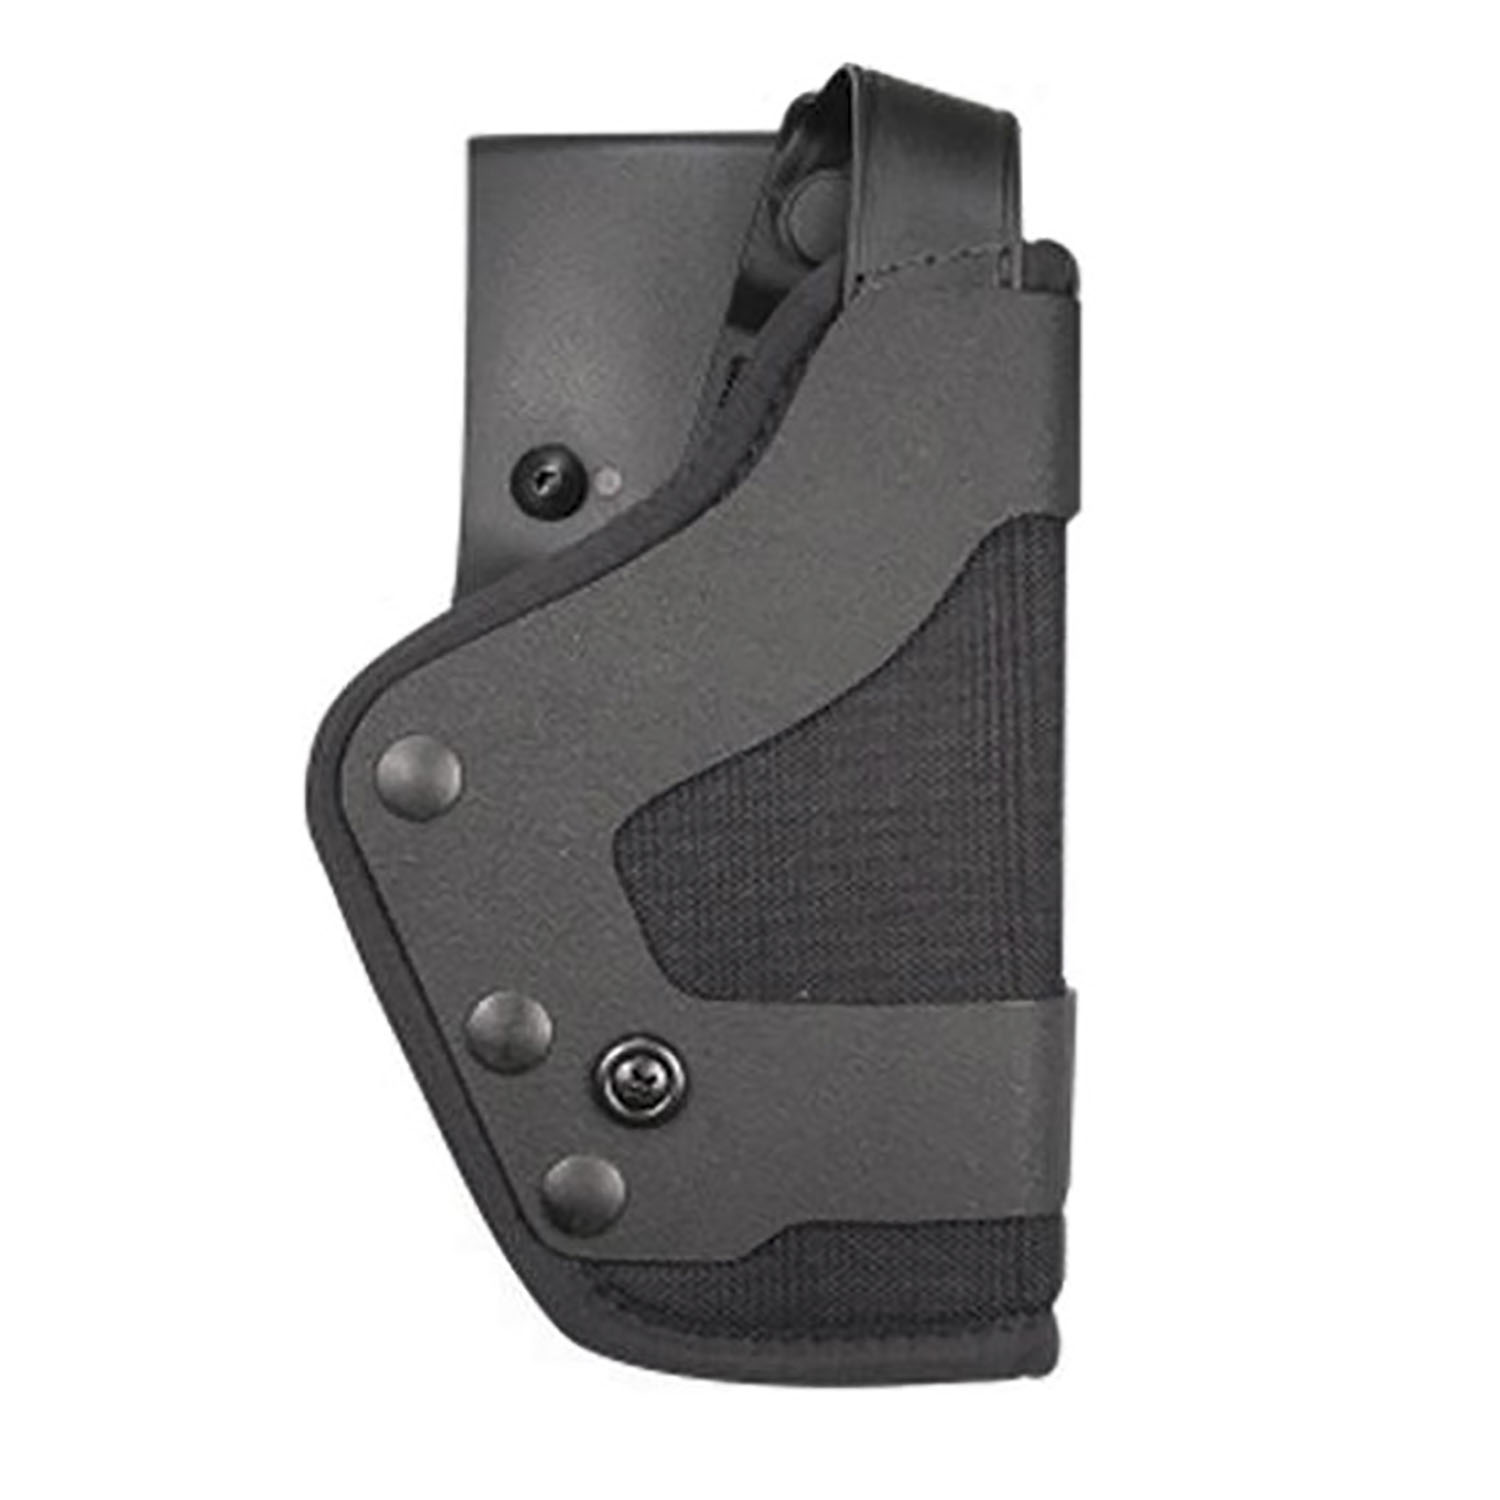 Uncle Mikes Pro 3 Slimline Triple Retention Duty Holster. uncle mikes holst...